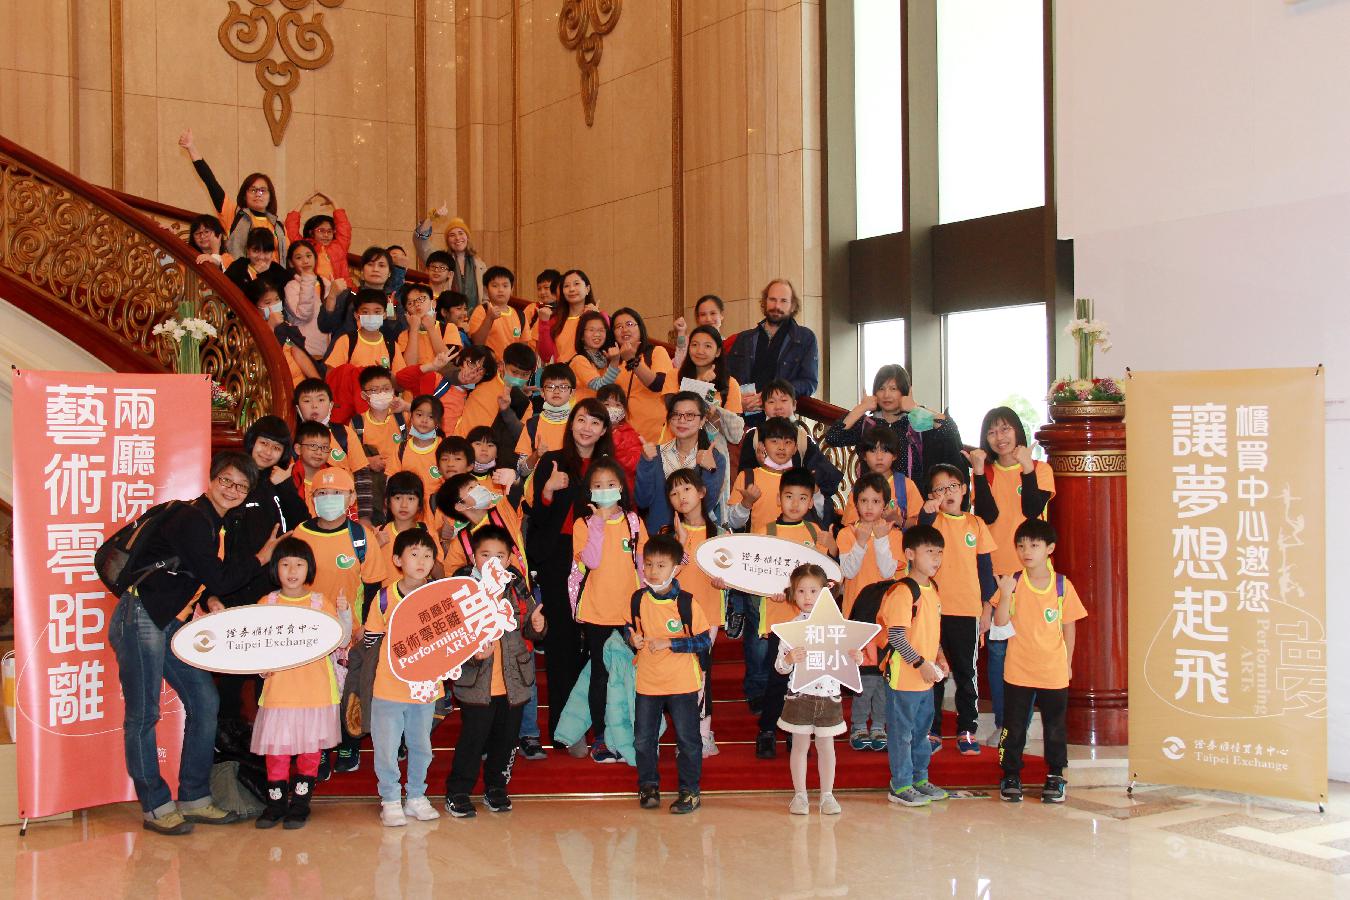 TPEx sponsored “Art without  Distance” held by the National Theater & Concert Hall for children in rural areas to participate in art and cultural events .